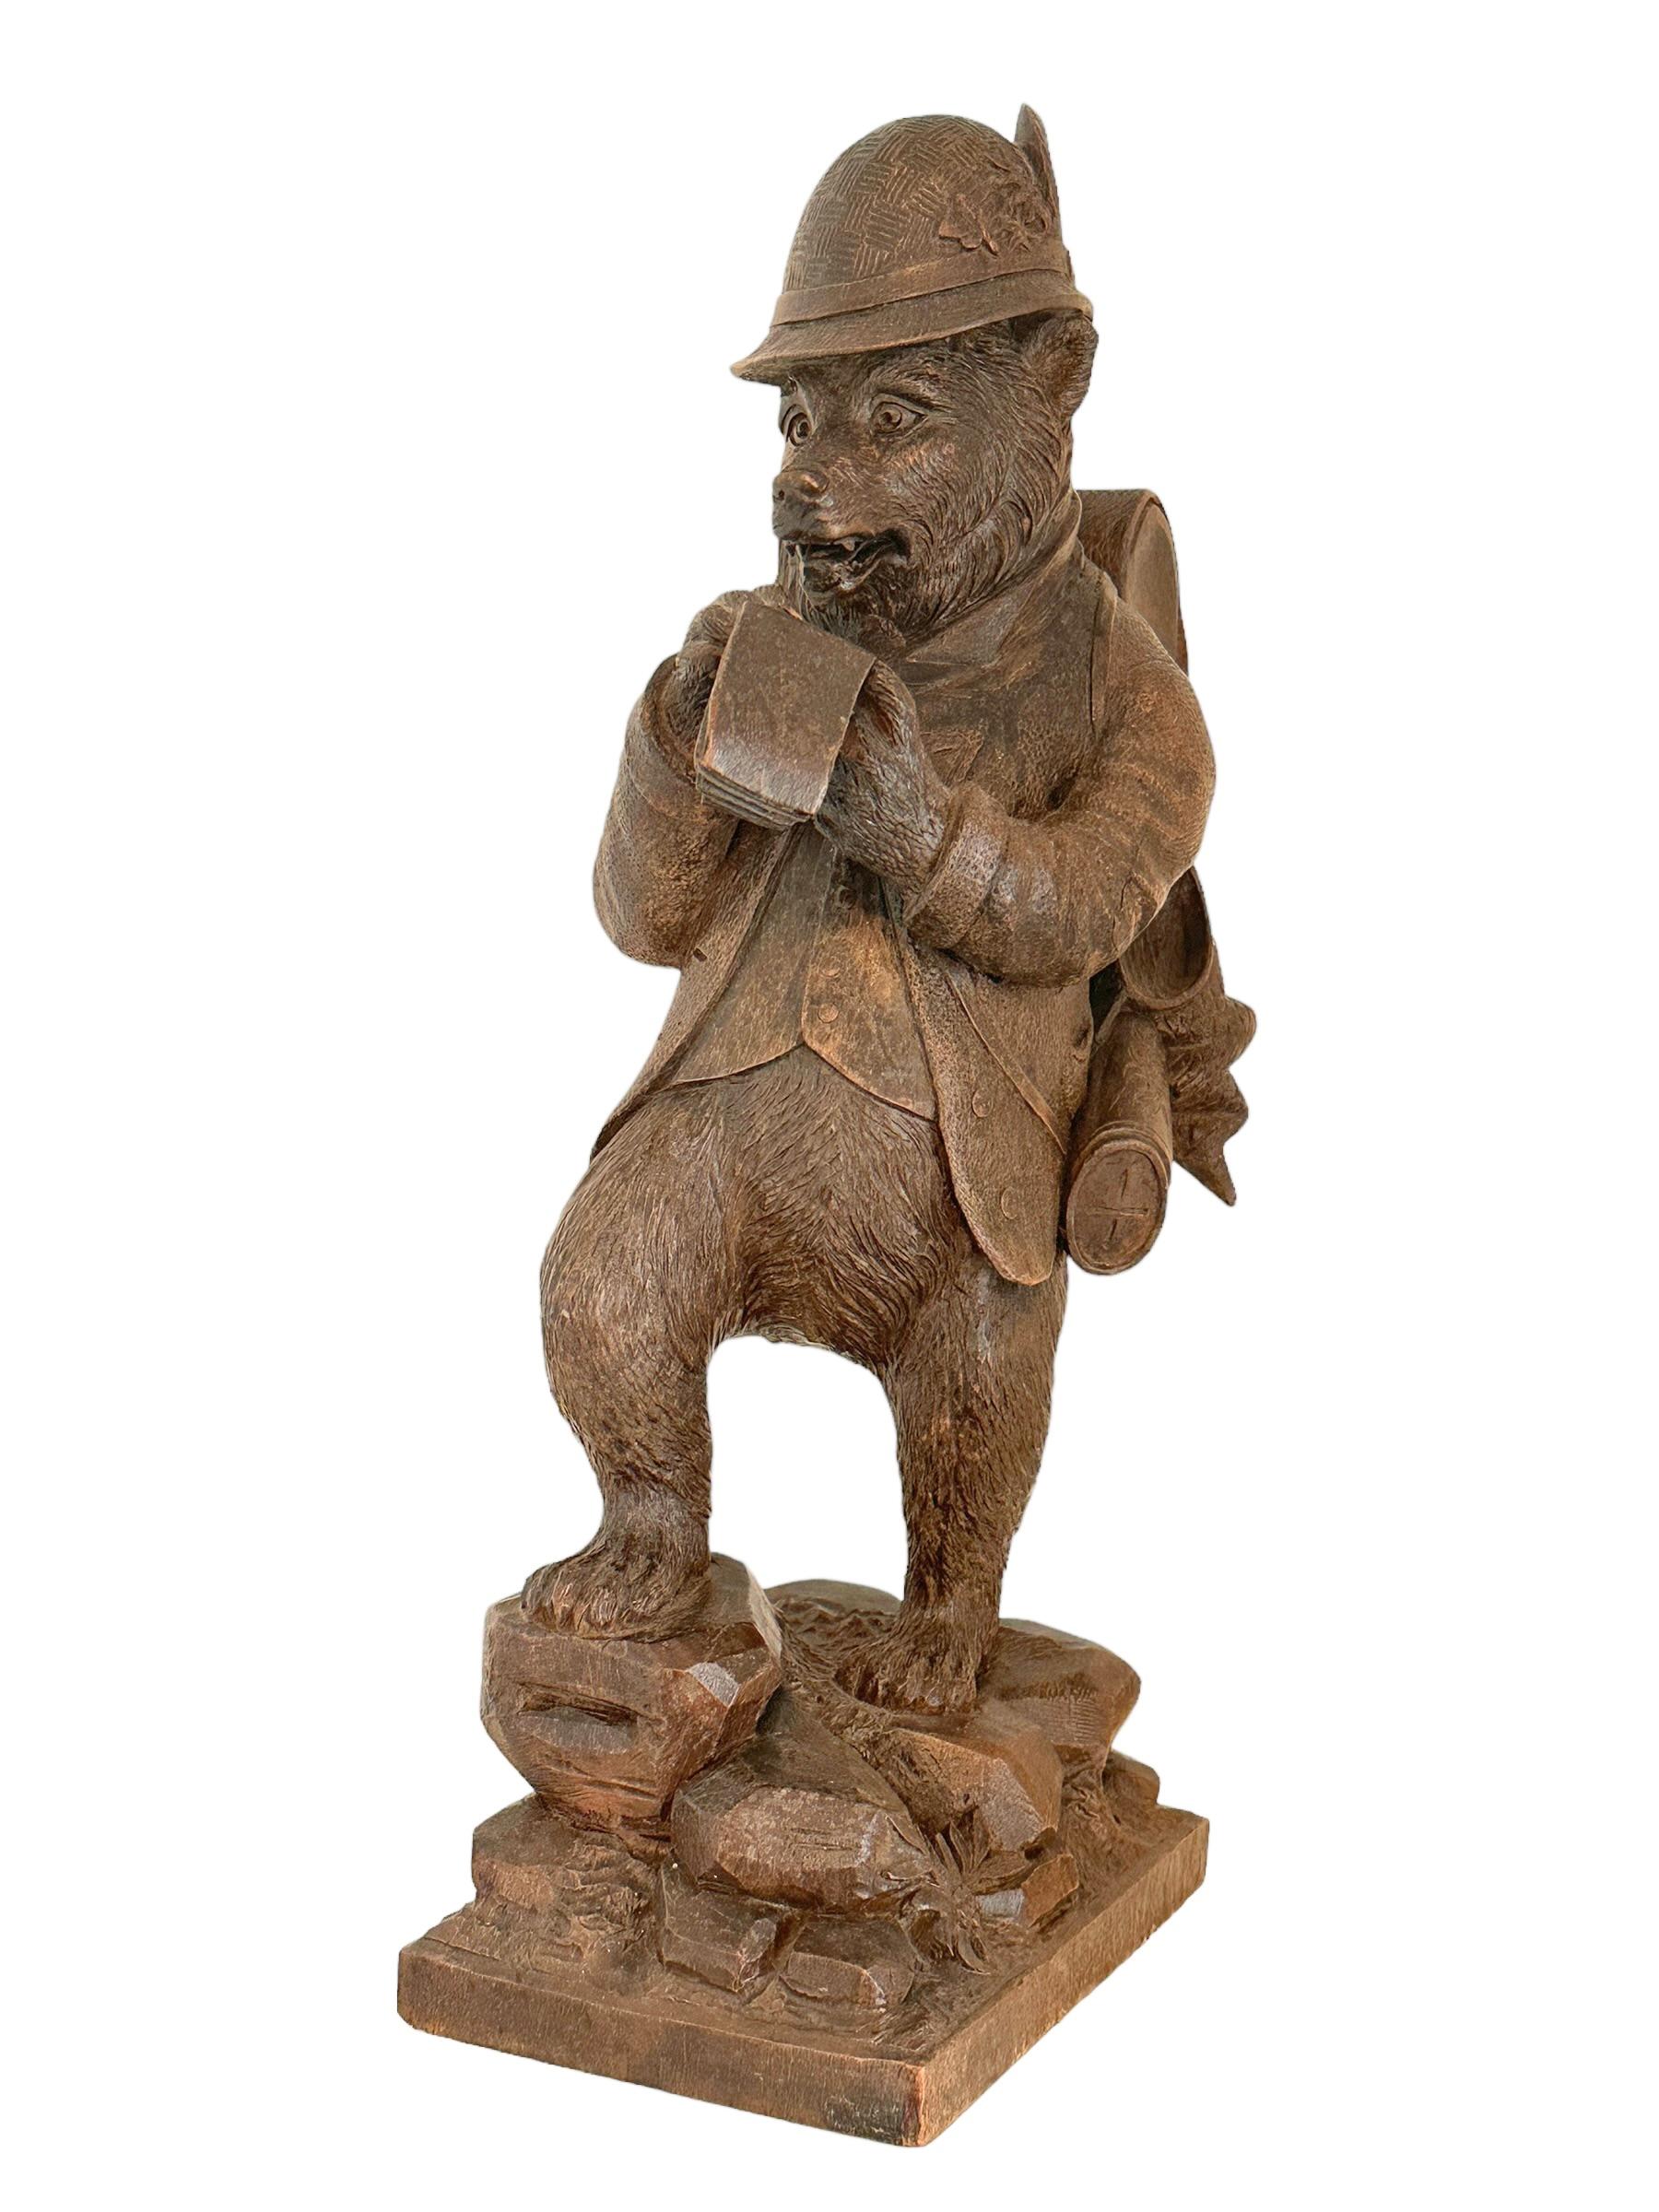 A great looking hand carved original wooden Folk Art Bear Statue. A great piece for a suitable ambiance in a Cabin room or the office of a Hunter or Woodsman. More than likely one of the Folk Art items made between 1860 and the late 1890s. In